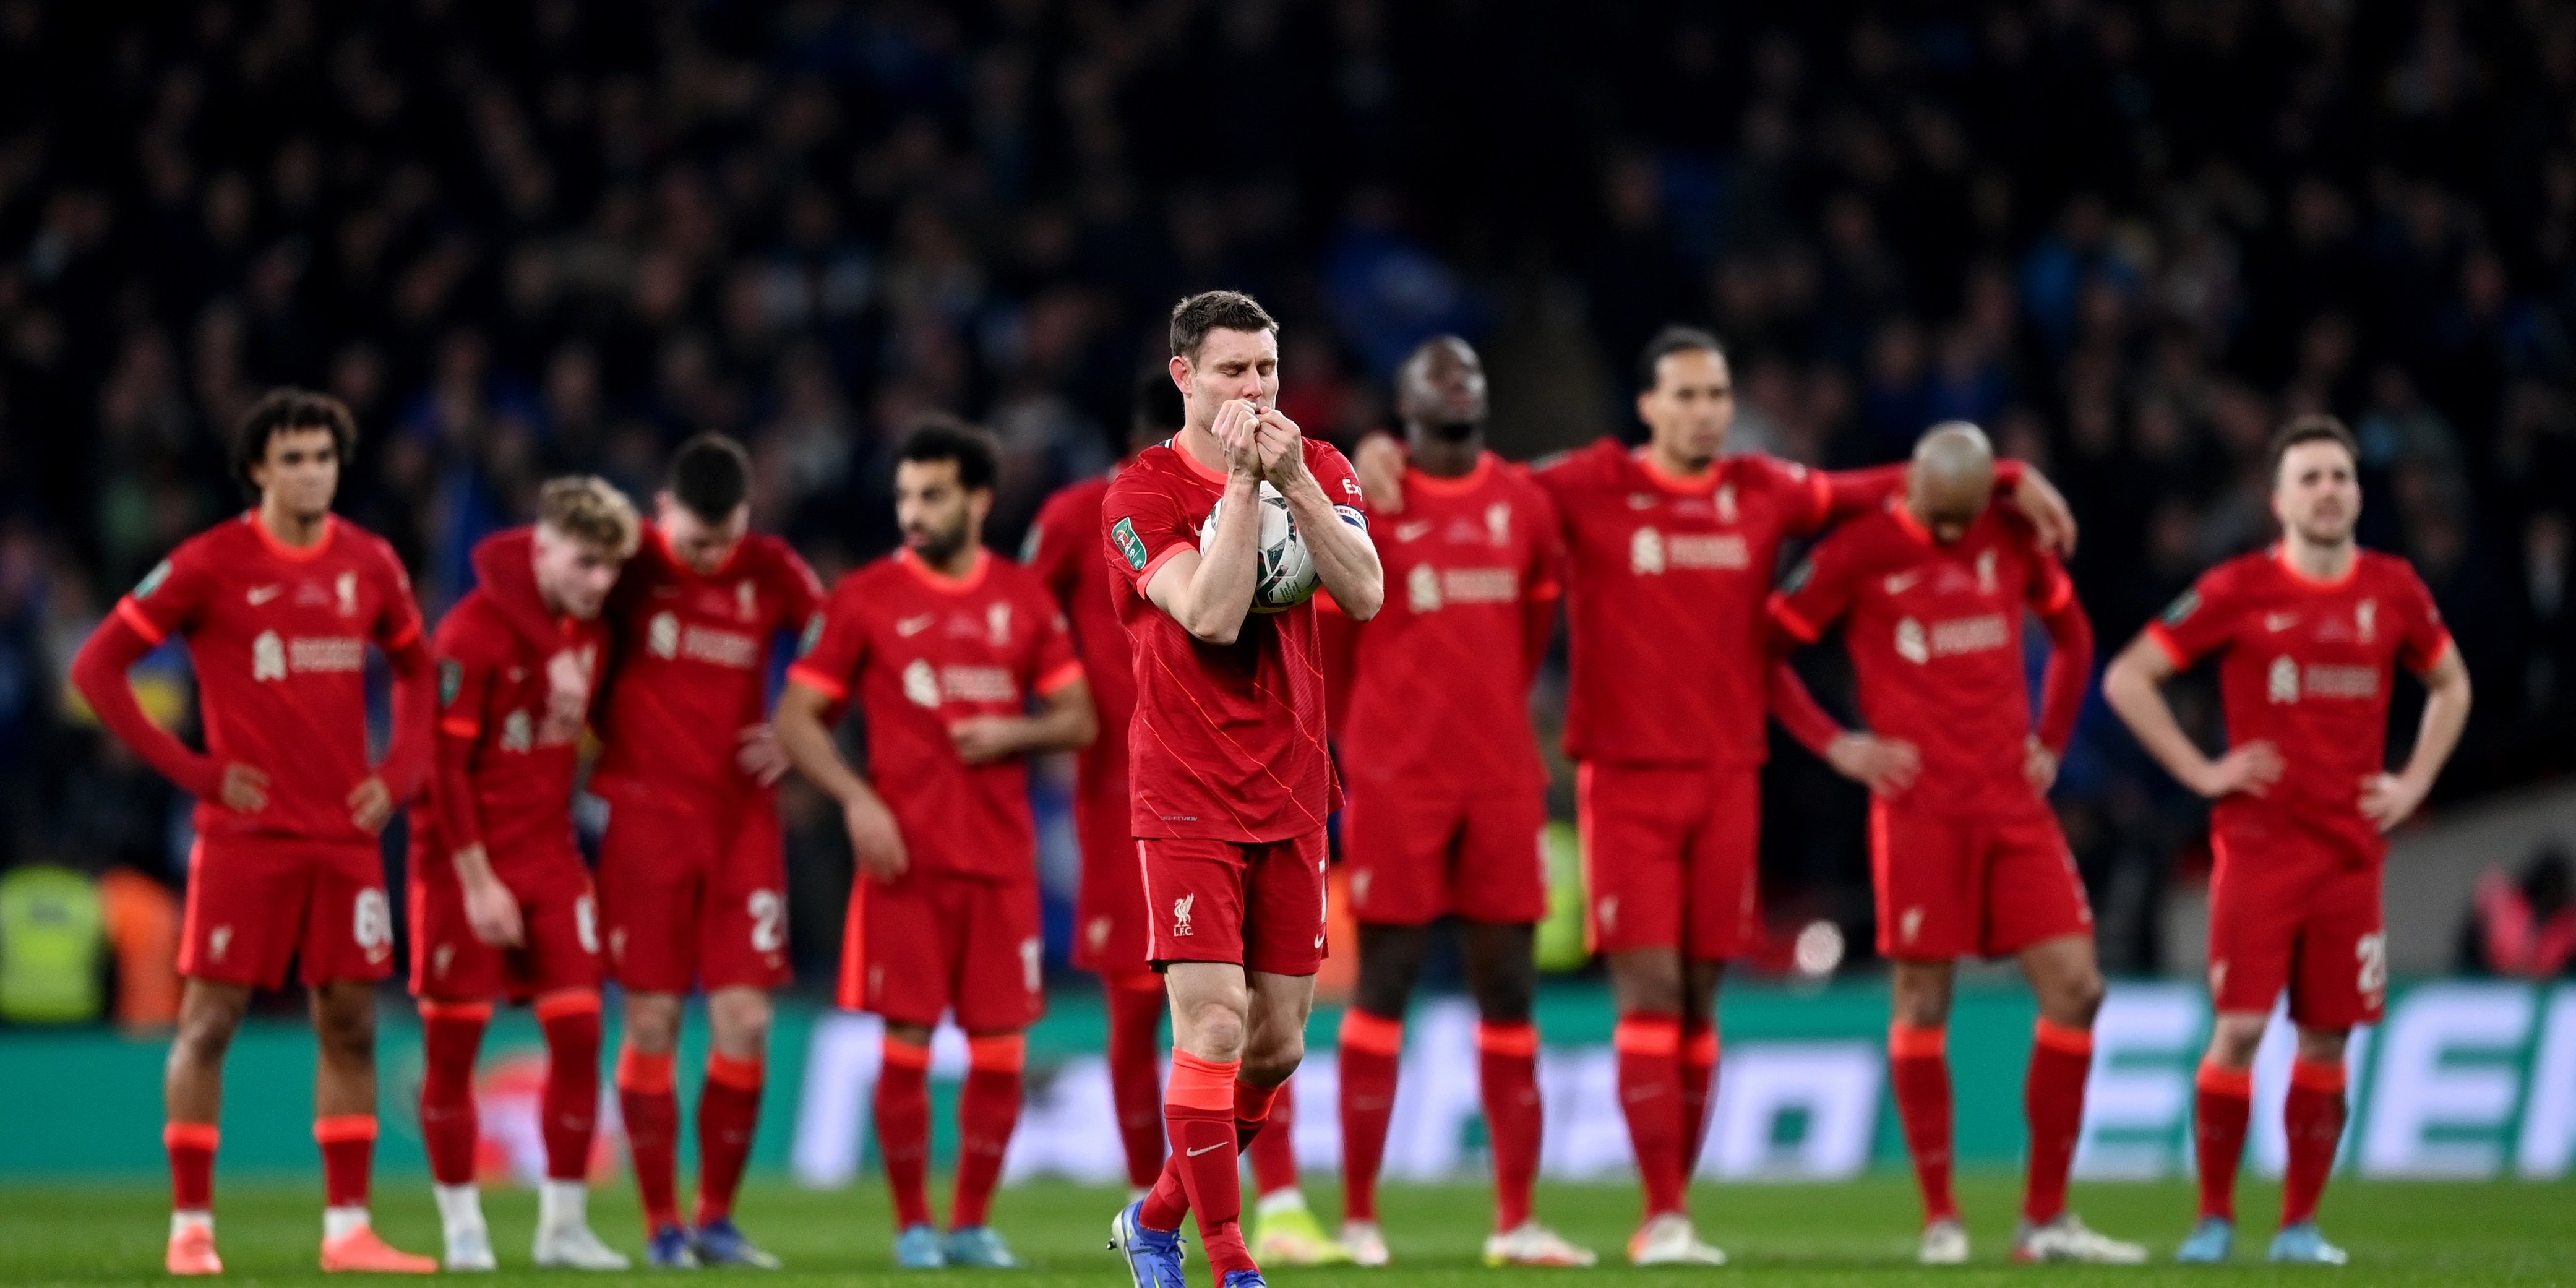 (Photo) Milner’s hilariously calm celebration amongst ecstatic Liverpool teammates spotted by eagle-eyed fan